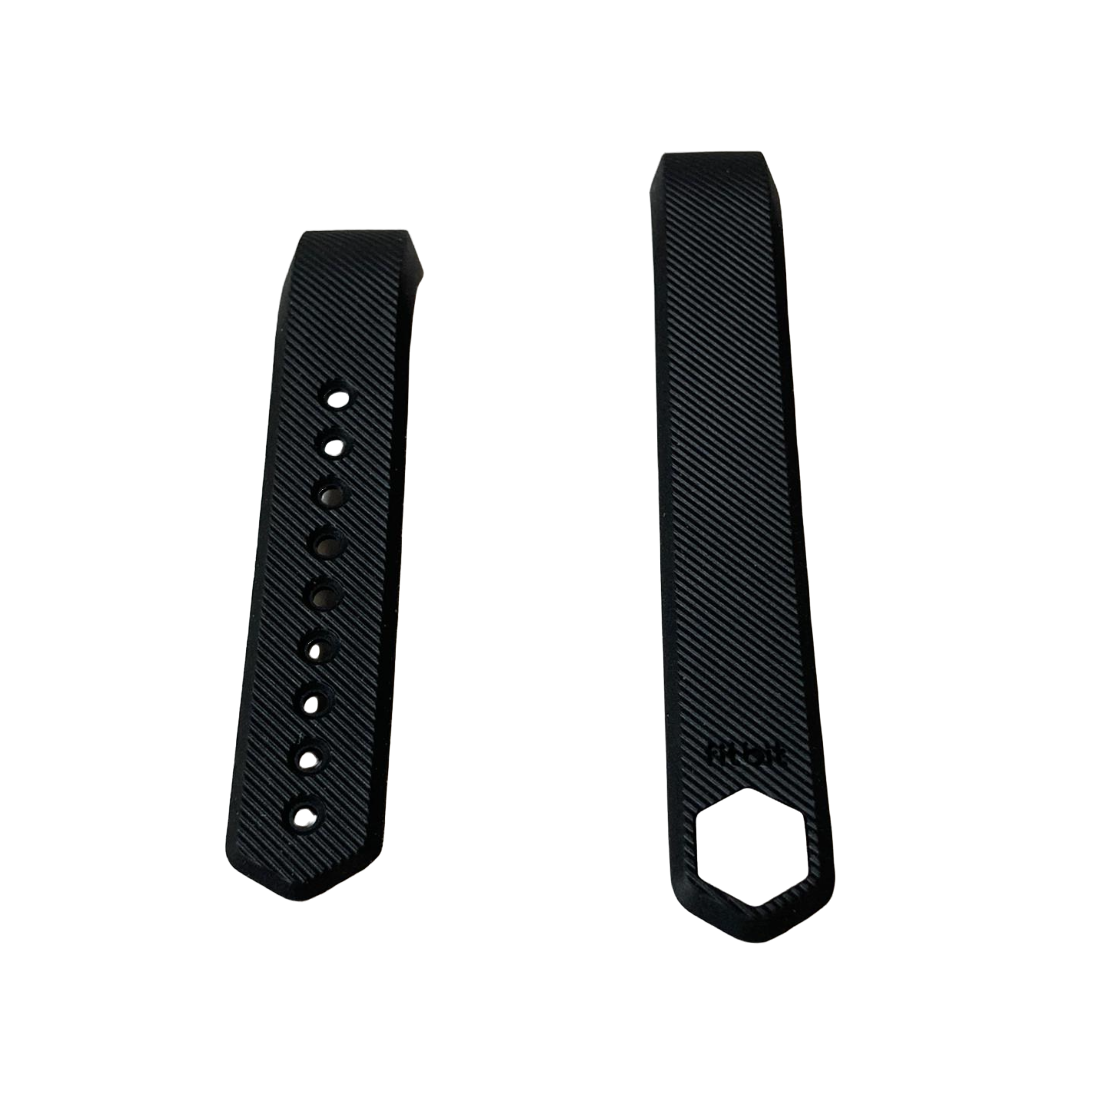 Fitbit FBR160ABBKS Charge 2 Accessory Band - Black - Small